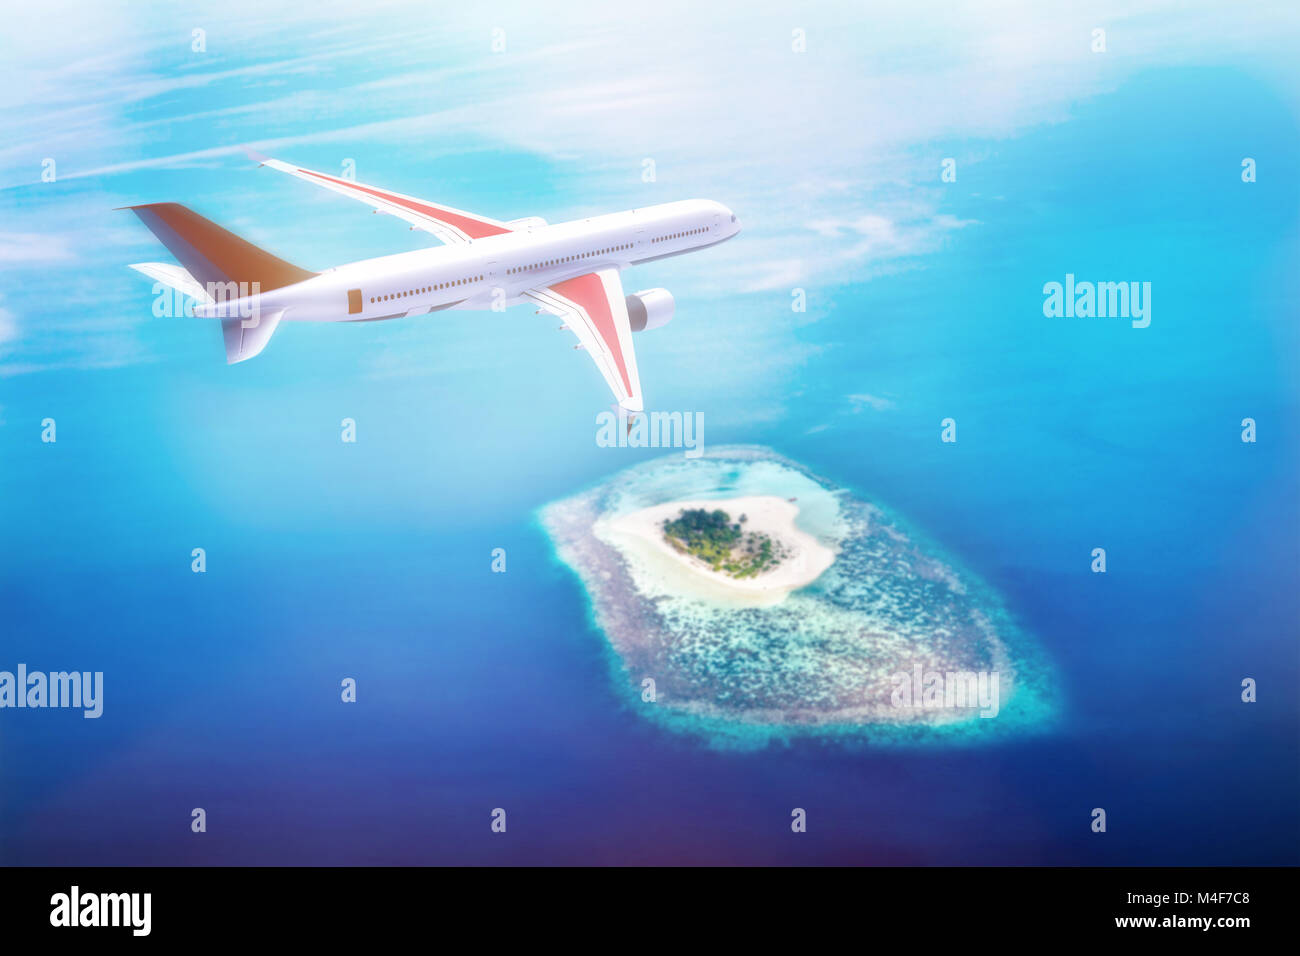 Airplane flying over Maldives islands on Indian Ocean. Travel Stock Photo